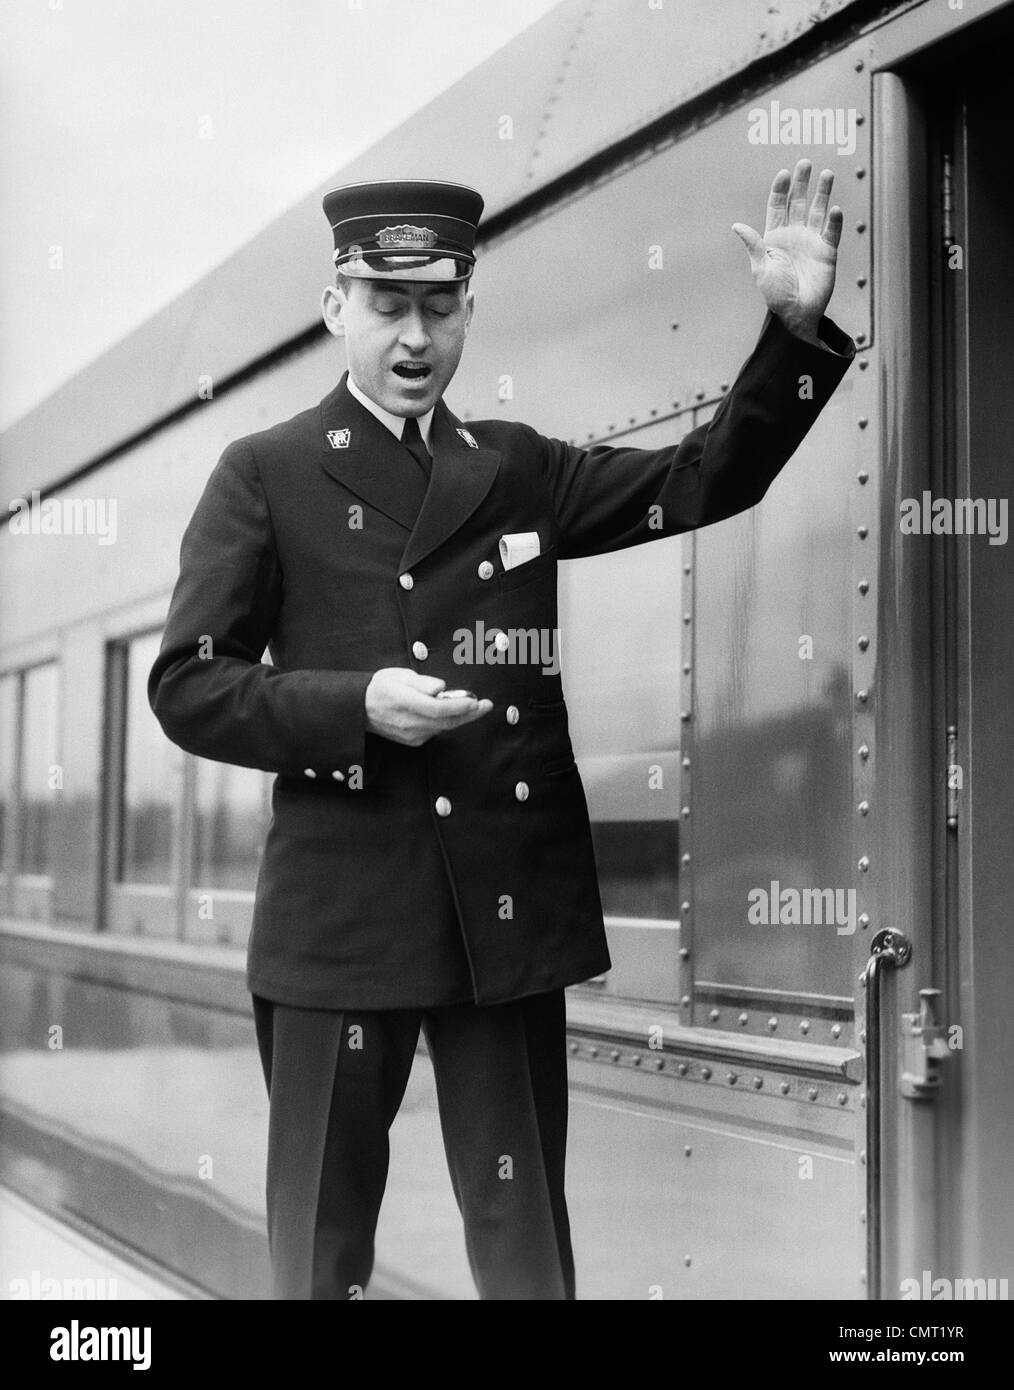 1930s CONDUCTOR MAKING FINAL BOARDING CALL OUTSIDE TRAIN Stock Photo